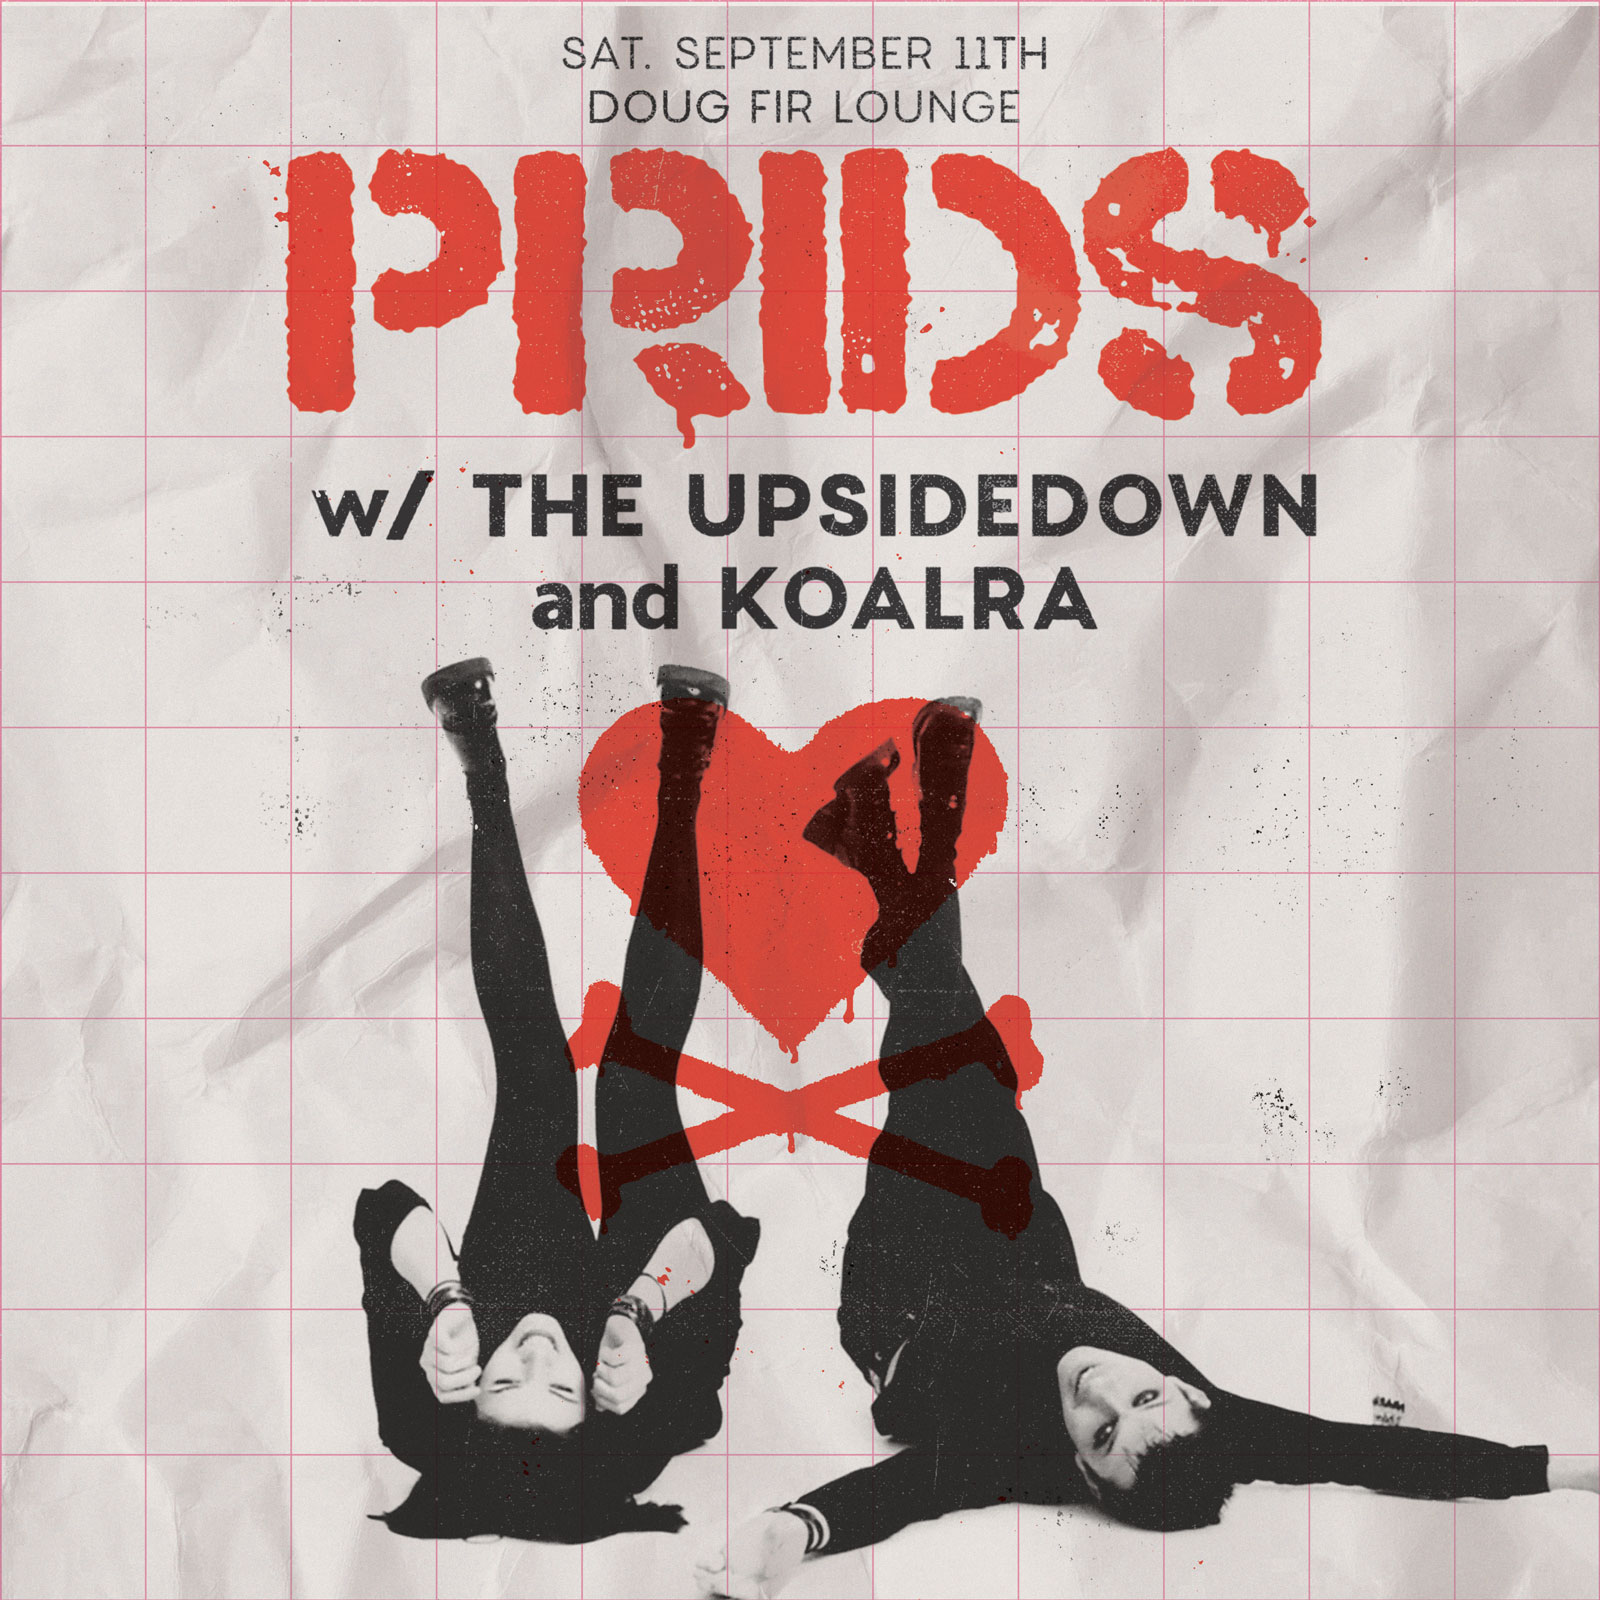 Preview: The Prids @ Doug Fir Lounge, September 11th